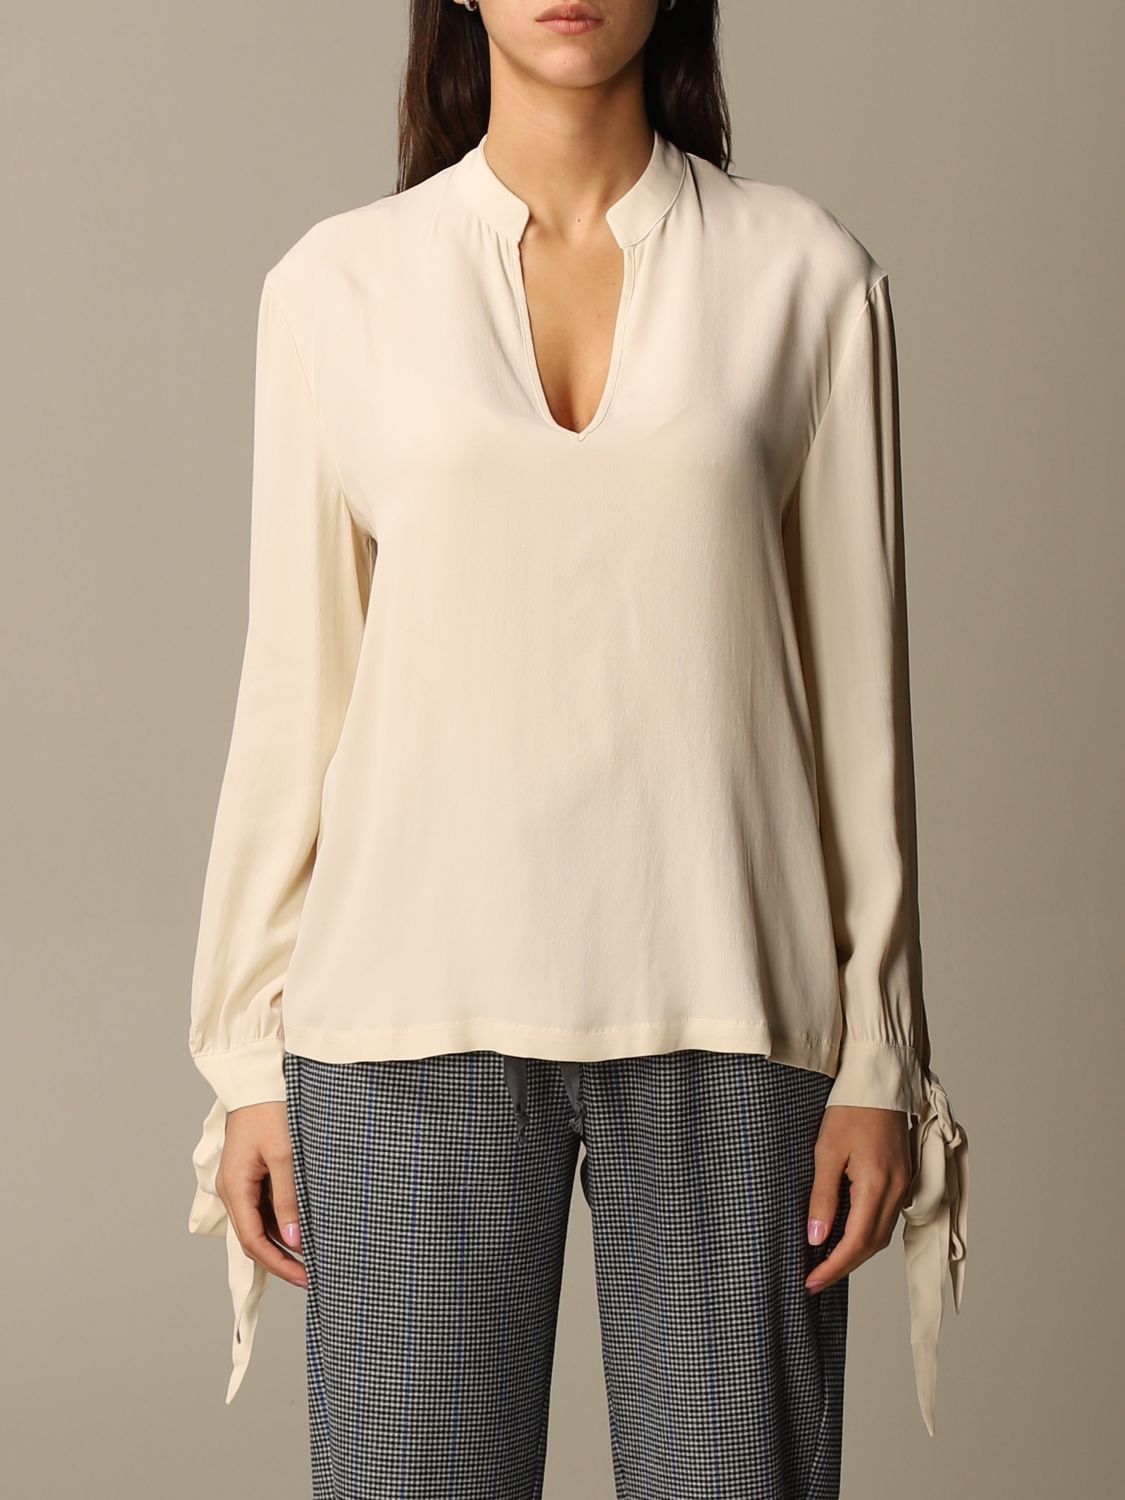 SEMICOUTURE: Blouse women - Yellow Cream | Top Semicouture Y0WU02 ...